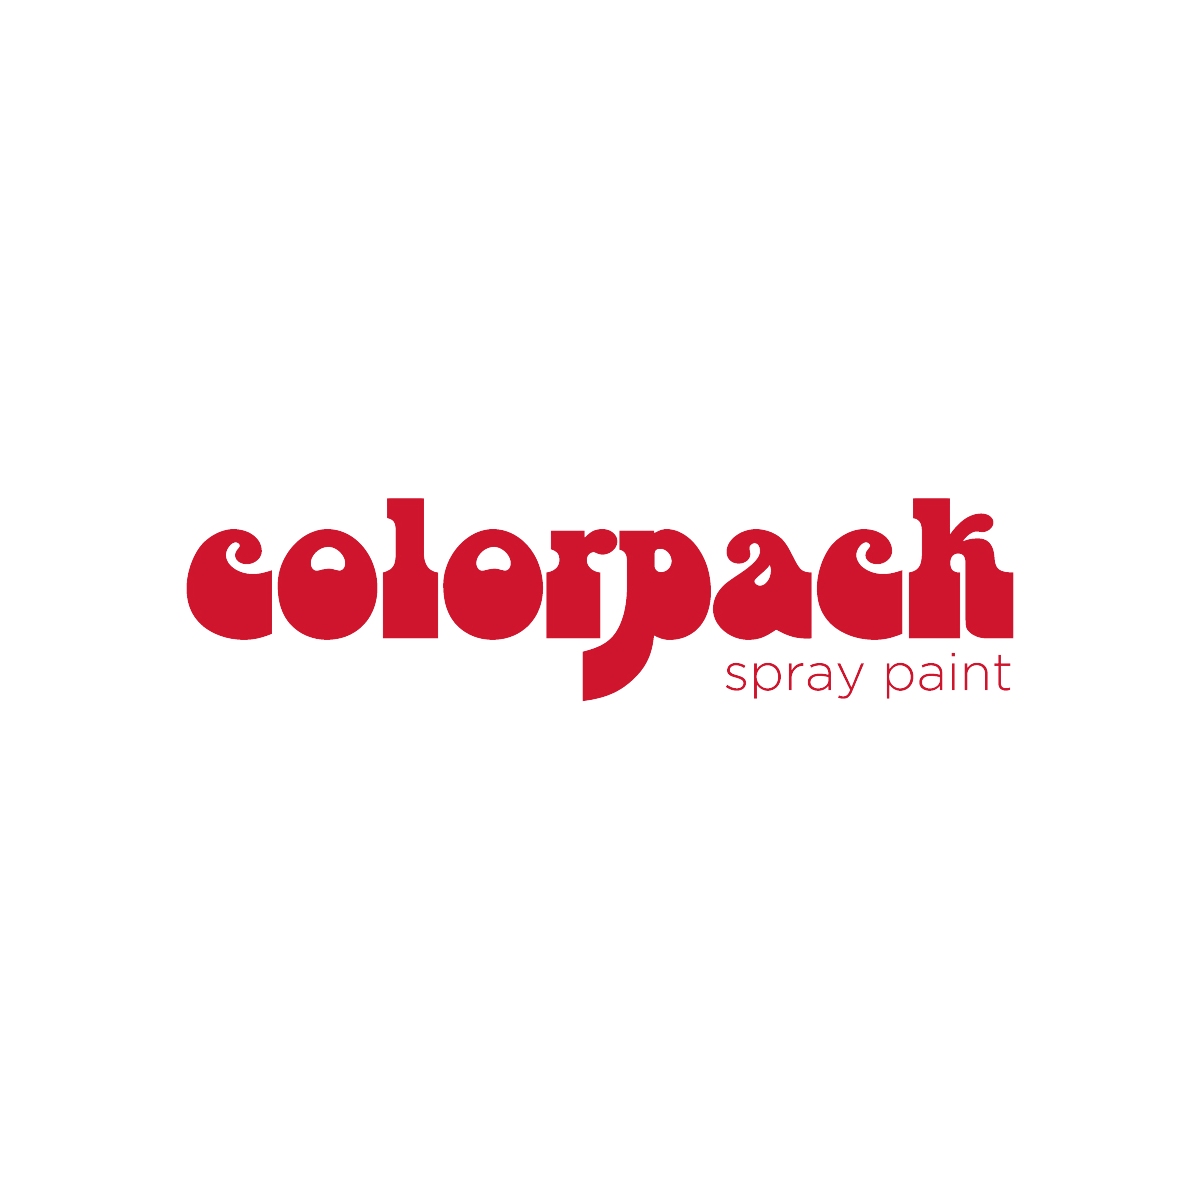 Colorpack